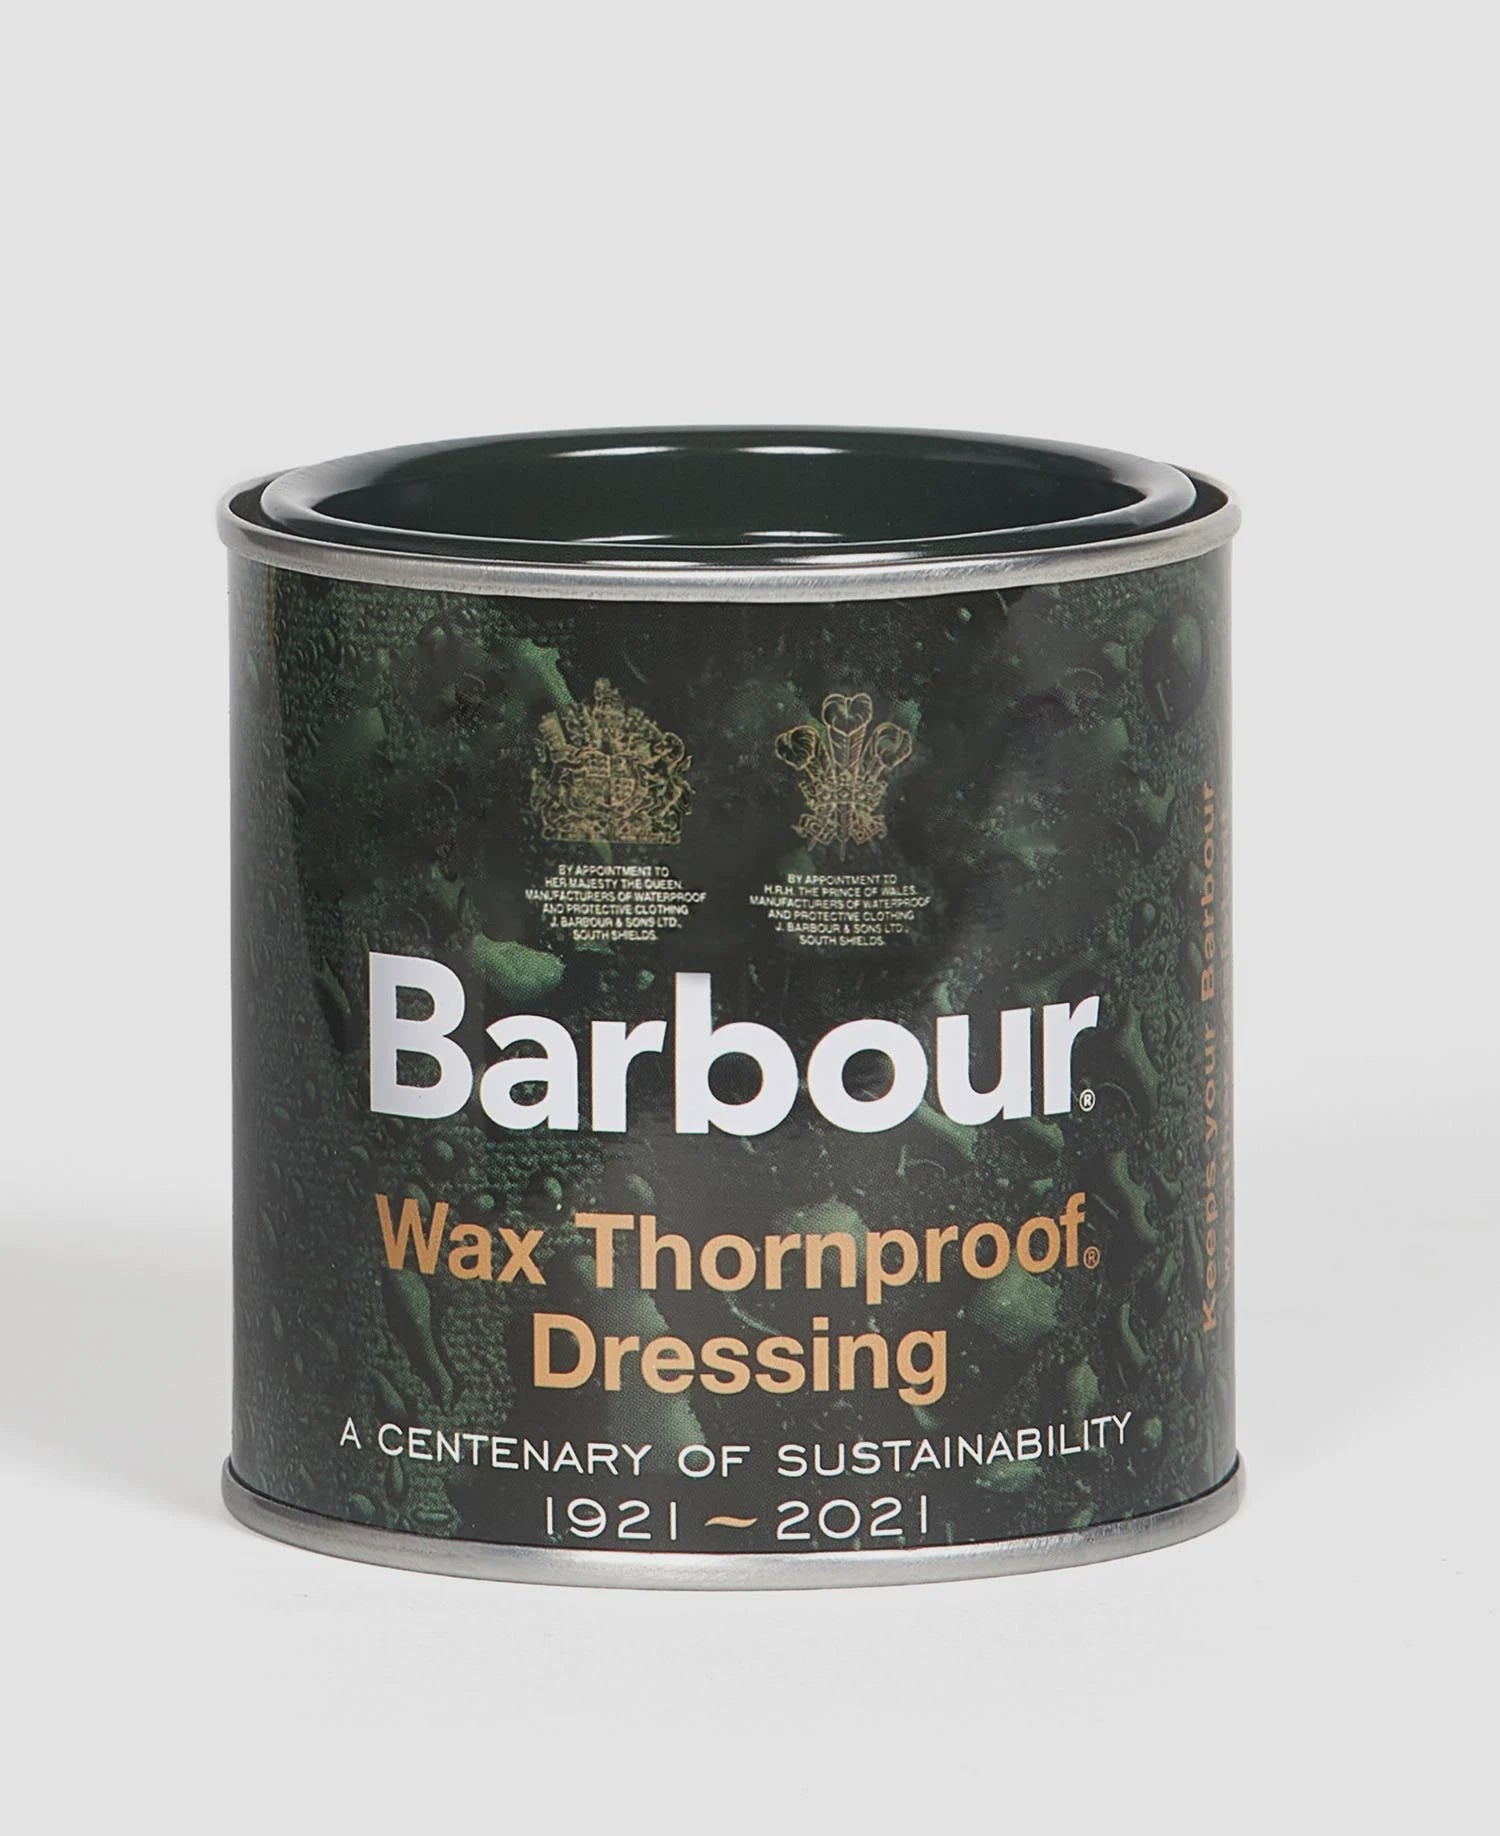 Barbour - Wax Thornproof Dressing